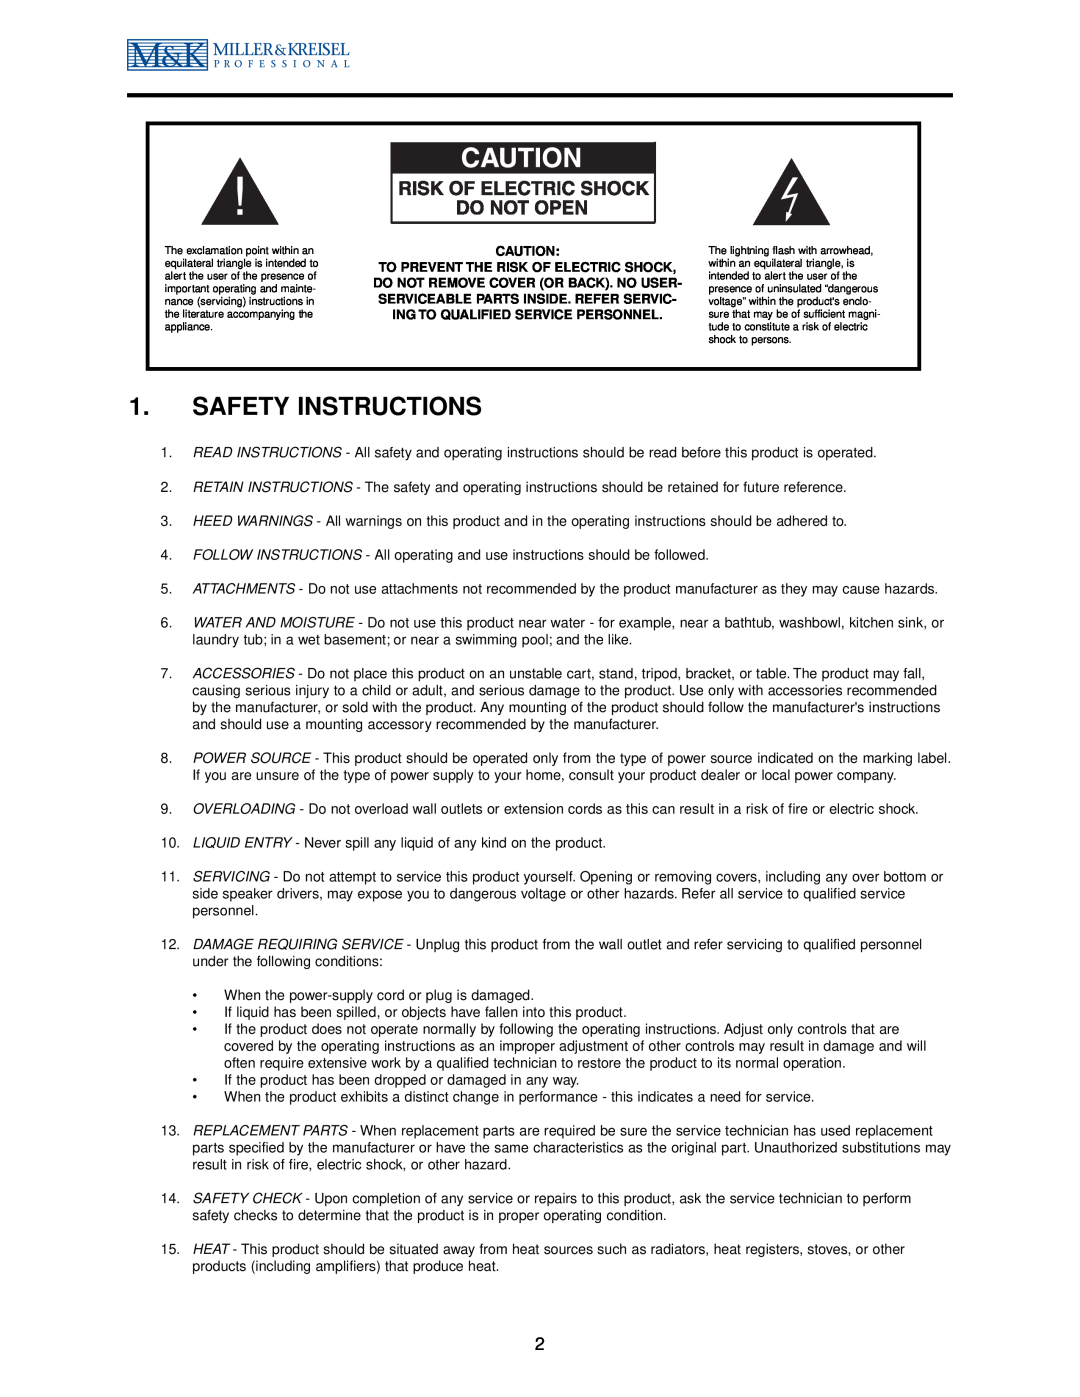 MK Sound MPS-5310, MPS-5410 operation manual Safety Instructions 